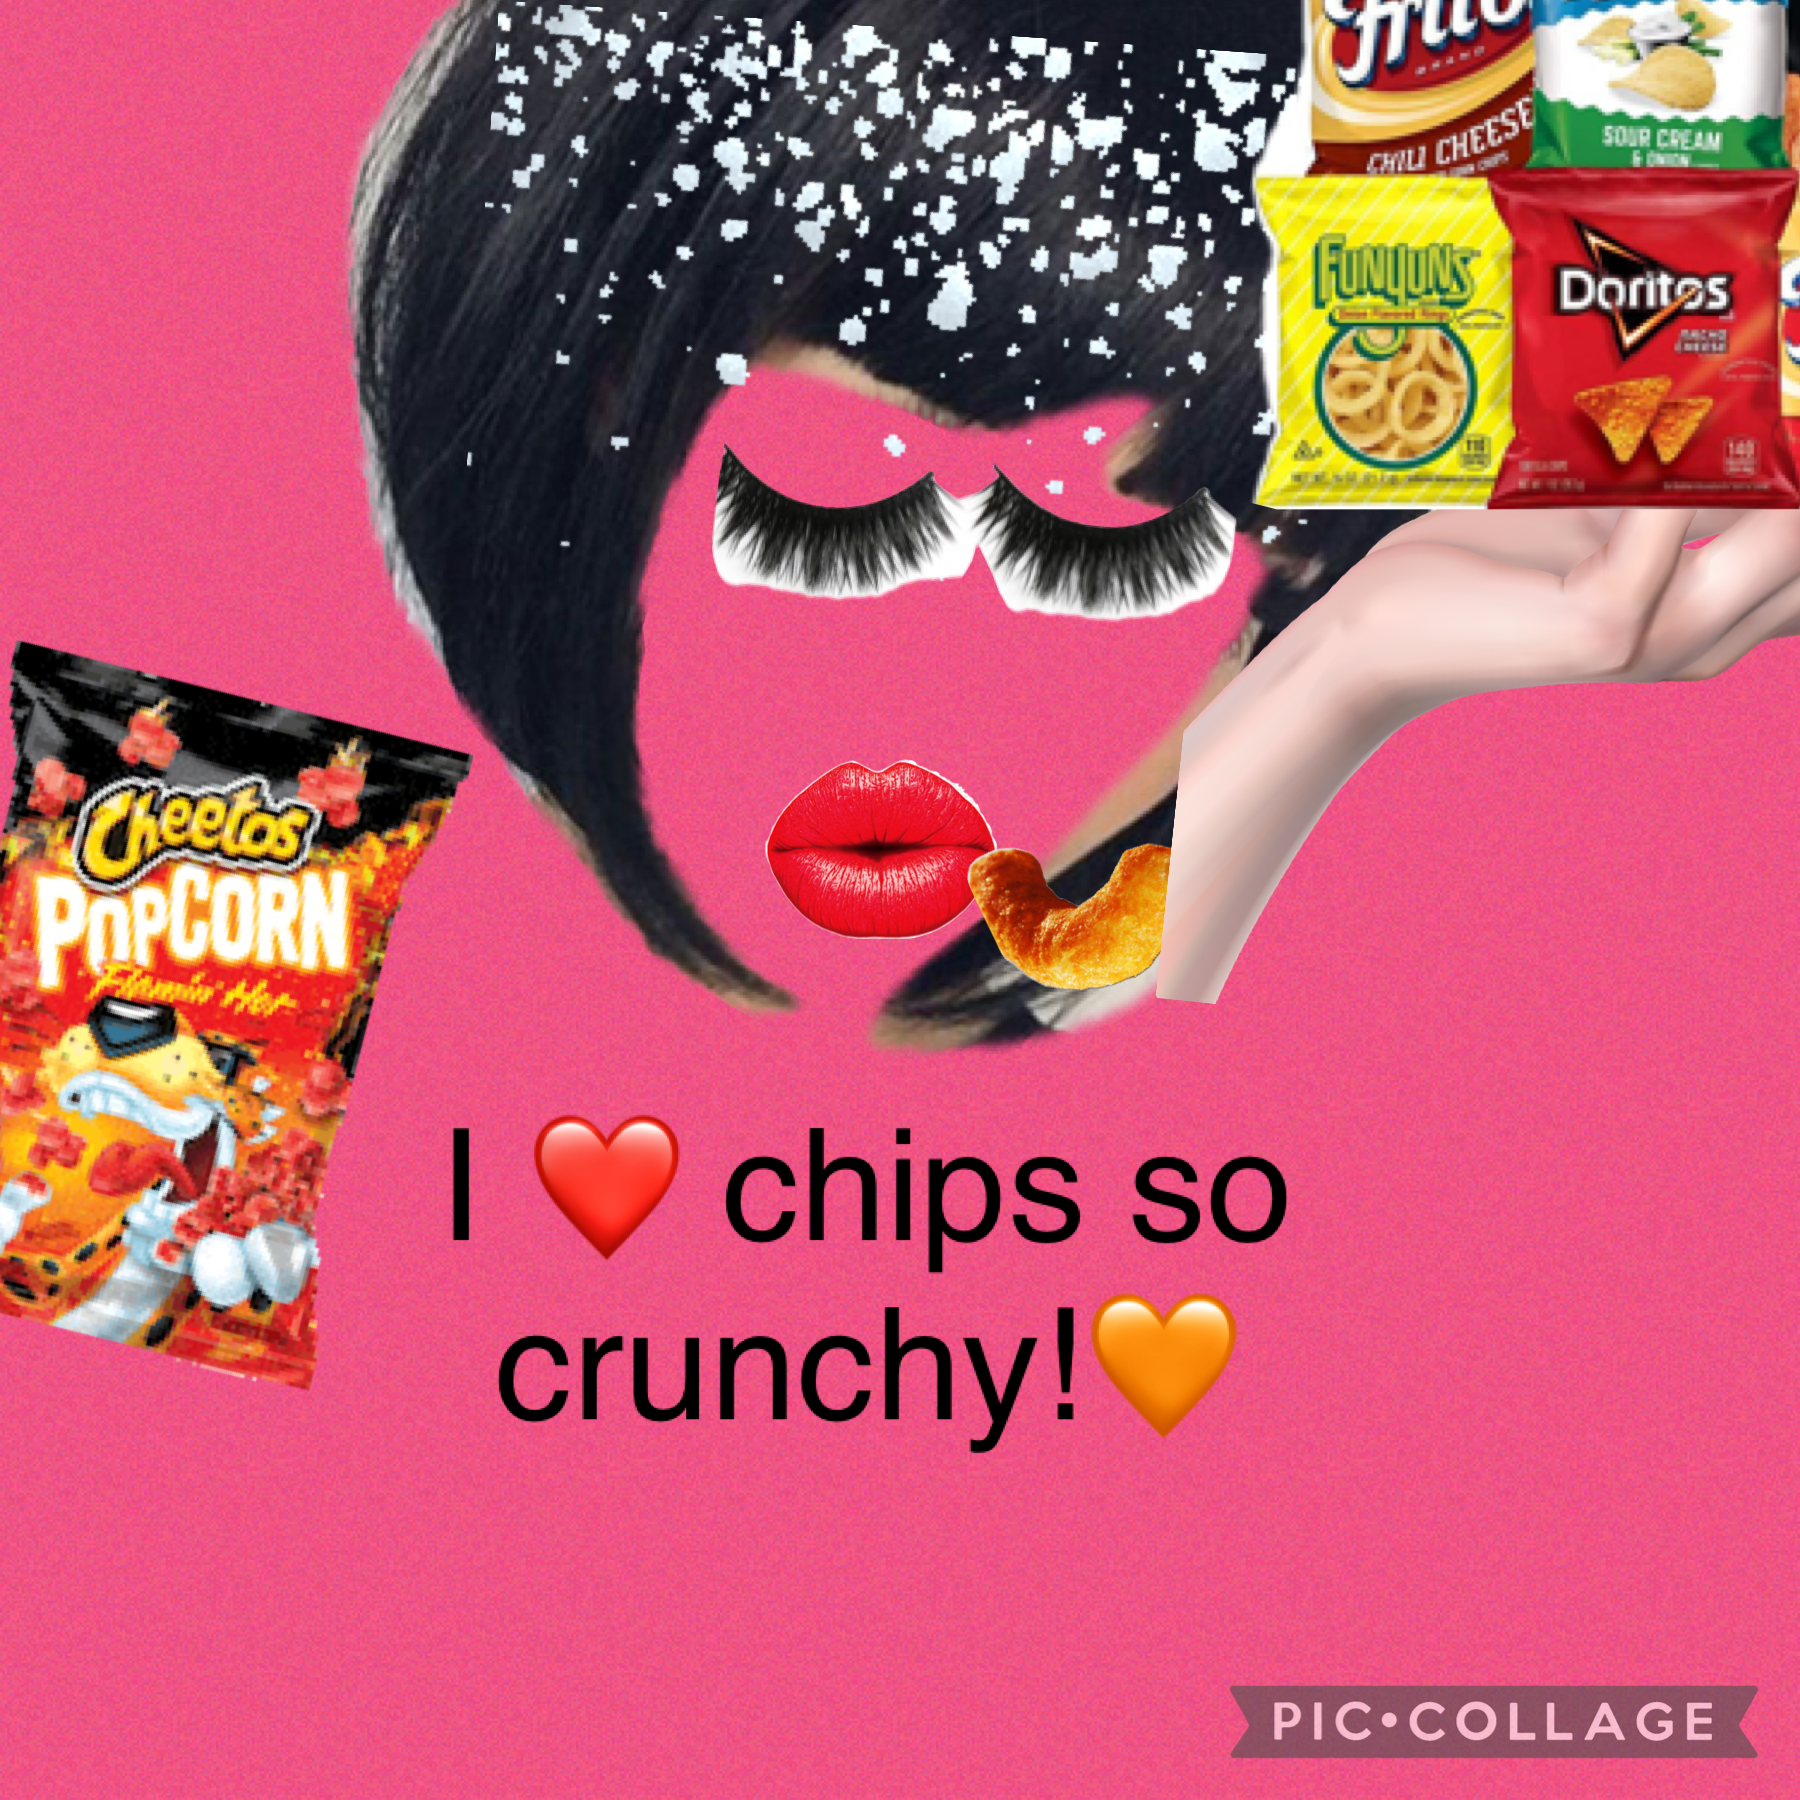 Girl ubsessed with chips !!